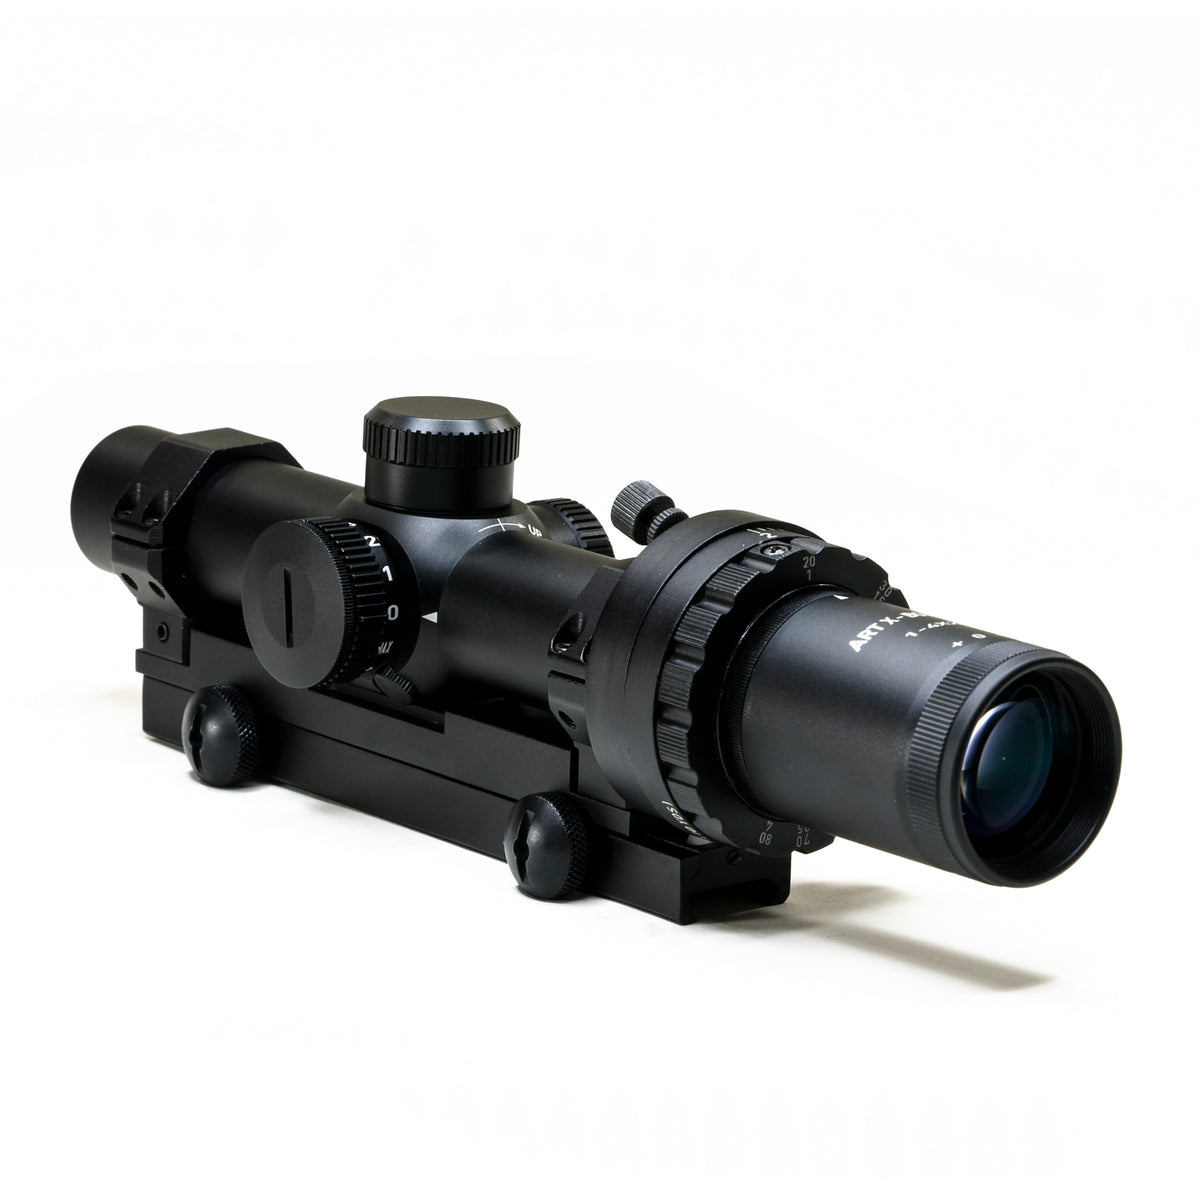 ART X-BOW Crossbow Scope Rear Angle View